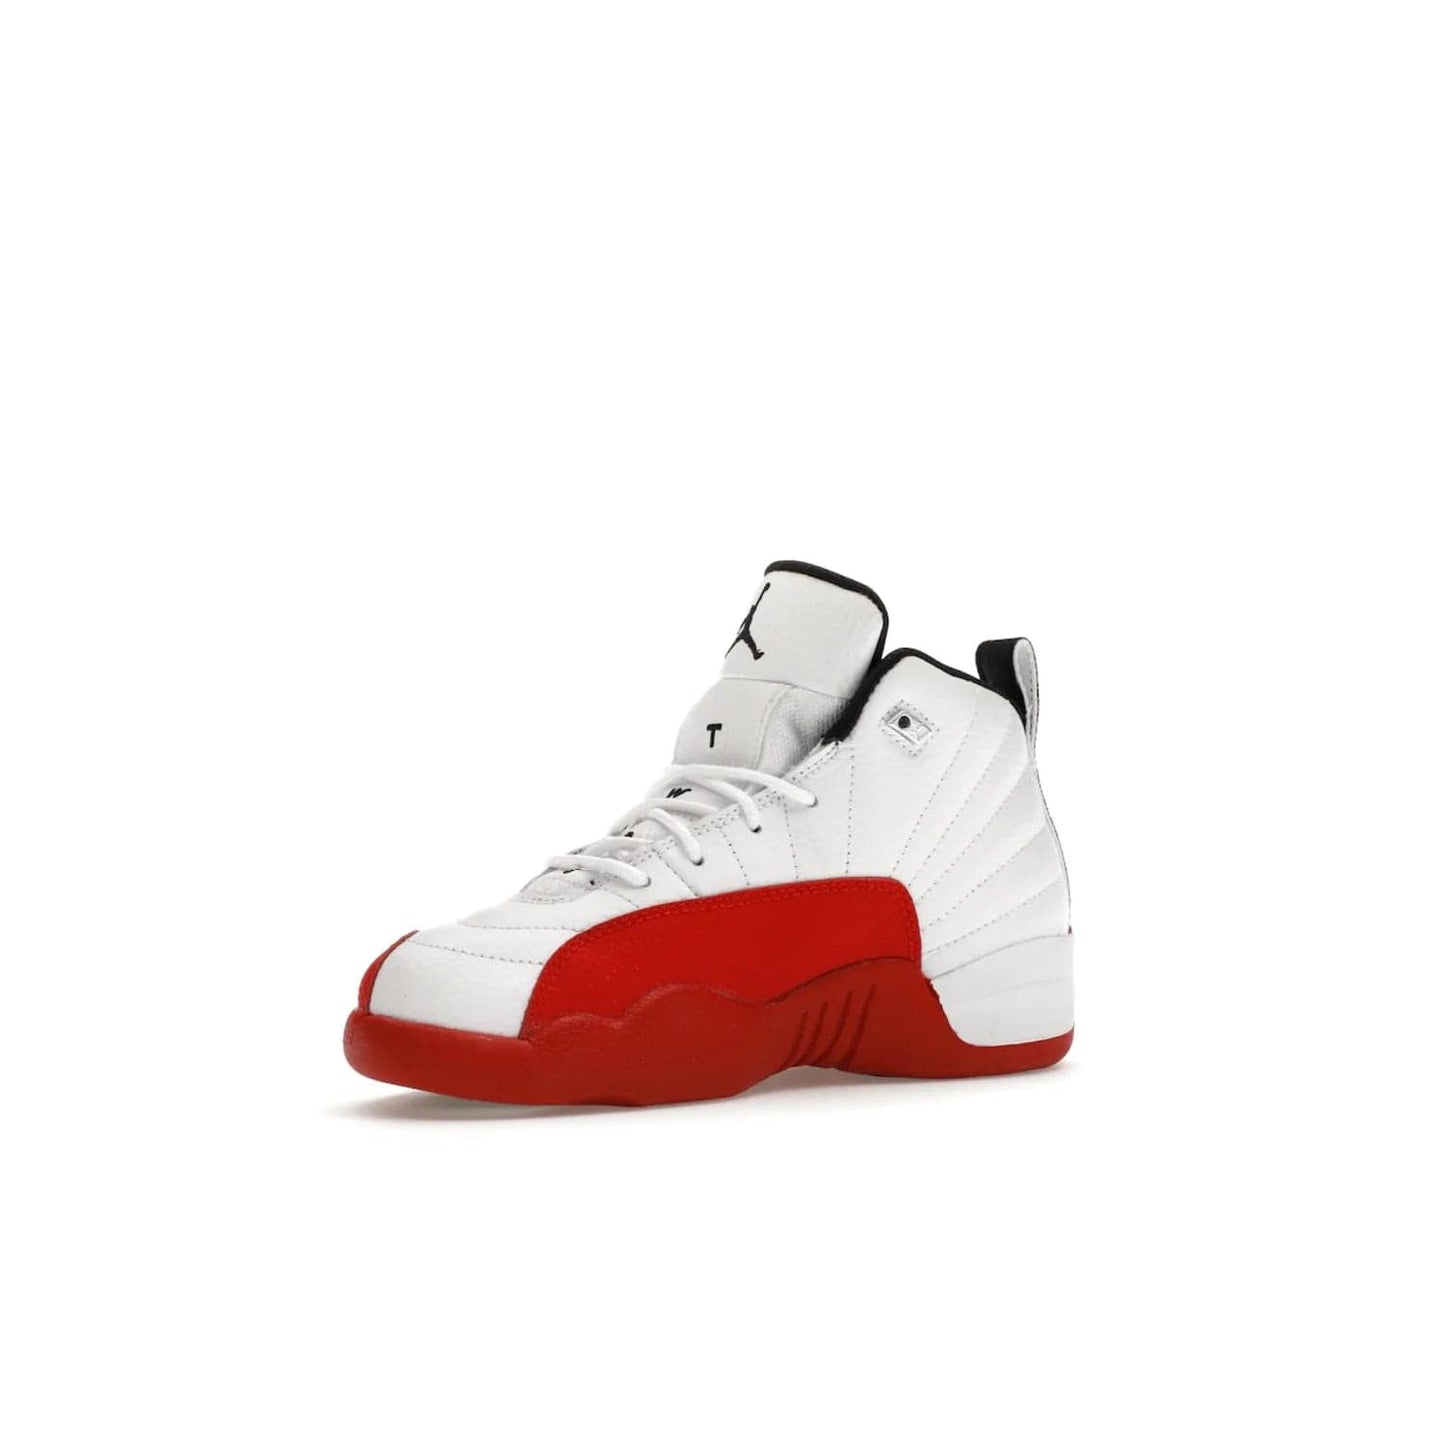 Jordan 12 Retro Cherry (2023) (PS) - Image 16 - Only at www.BallersClubKickz.com - Jordan 12 Retro Cherry dropping for toddlers in 2023! White leather upper with black overlays and red branding. Classic court style for your little one.